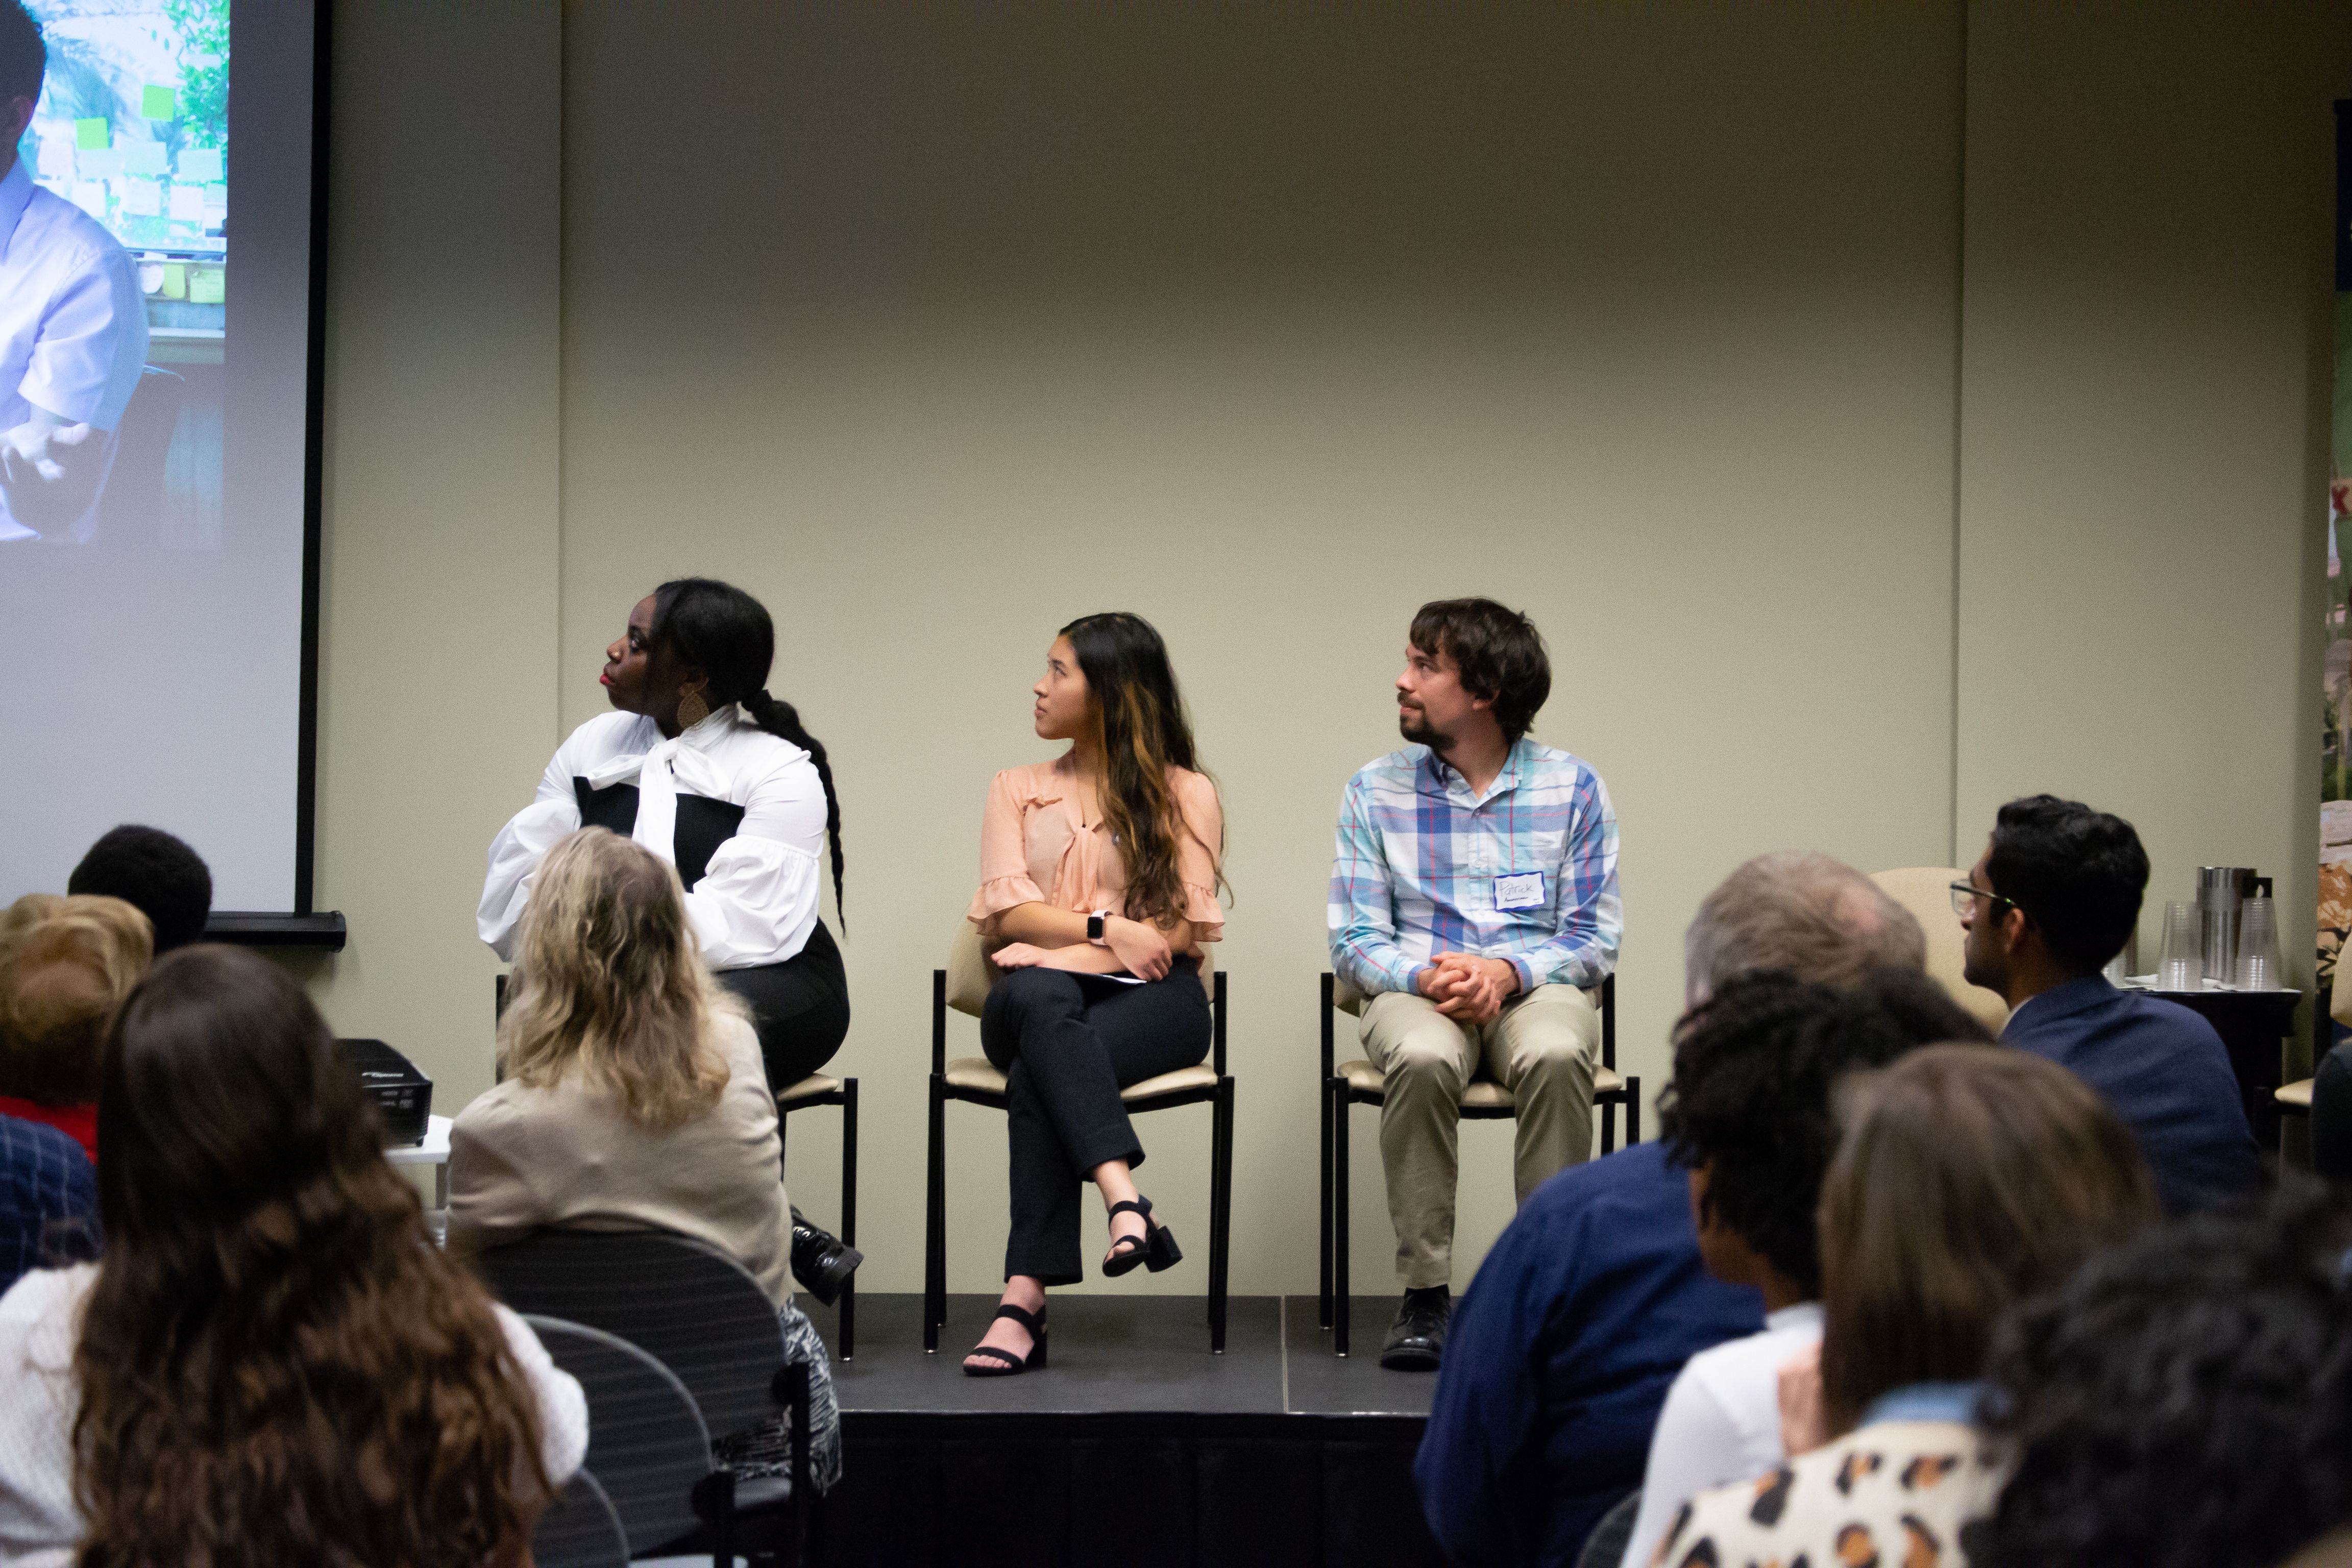 Angelica Ekeke (UC Berkeley Graduate School of Journalism), Micah Castelo (Syracuse University), and Patrick Ammerman (University of Pennsylvania) on stage during the Migration and Displacement panel. Image by Nora Moraga-Lewy. United States, 2019.